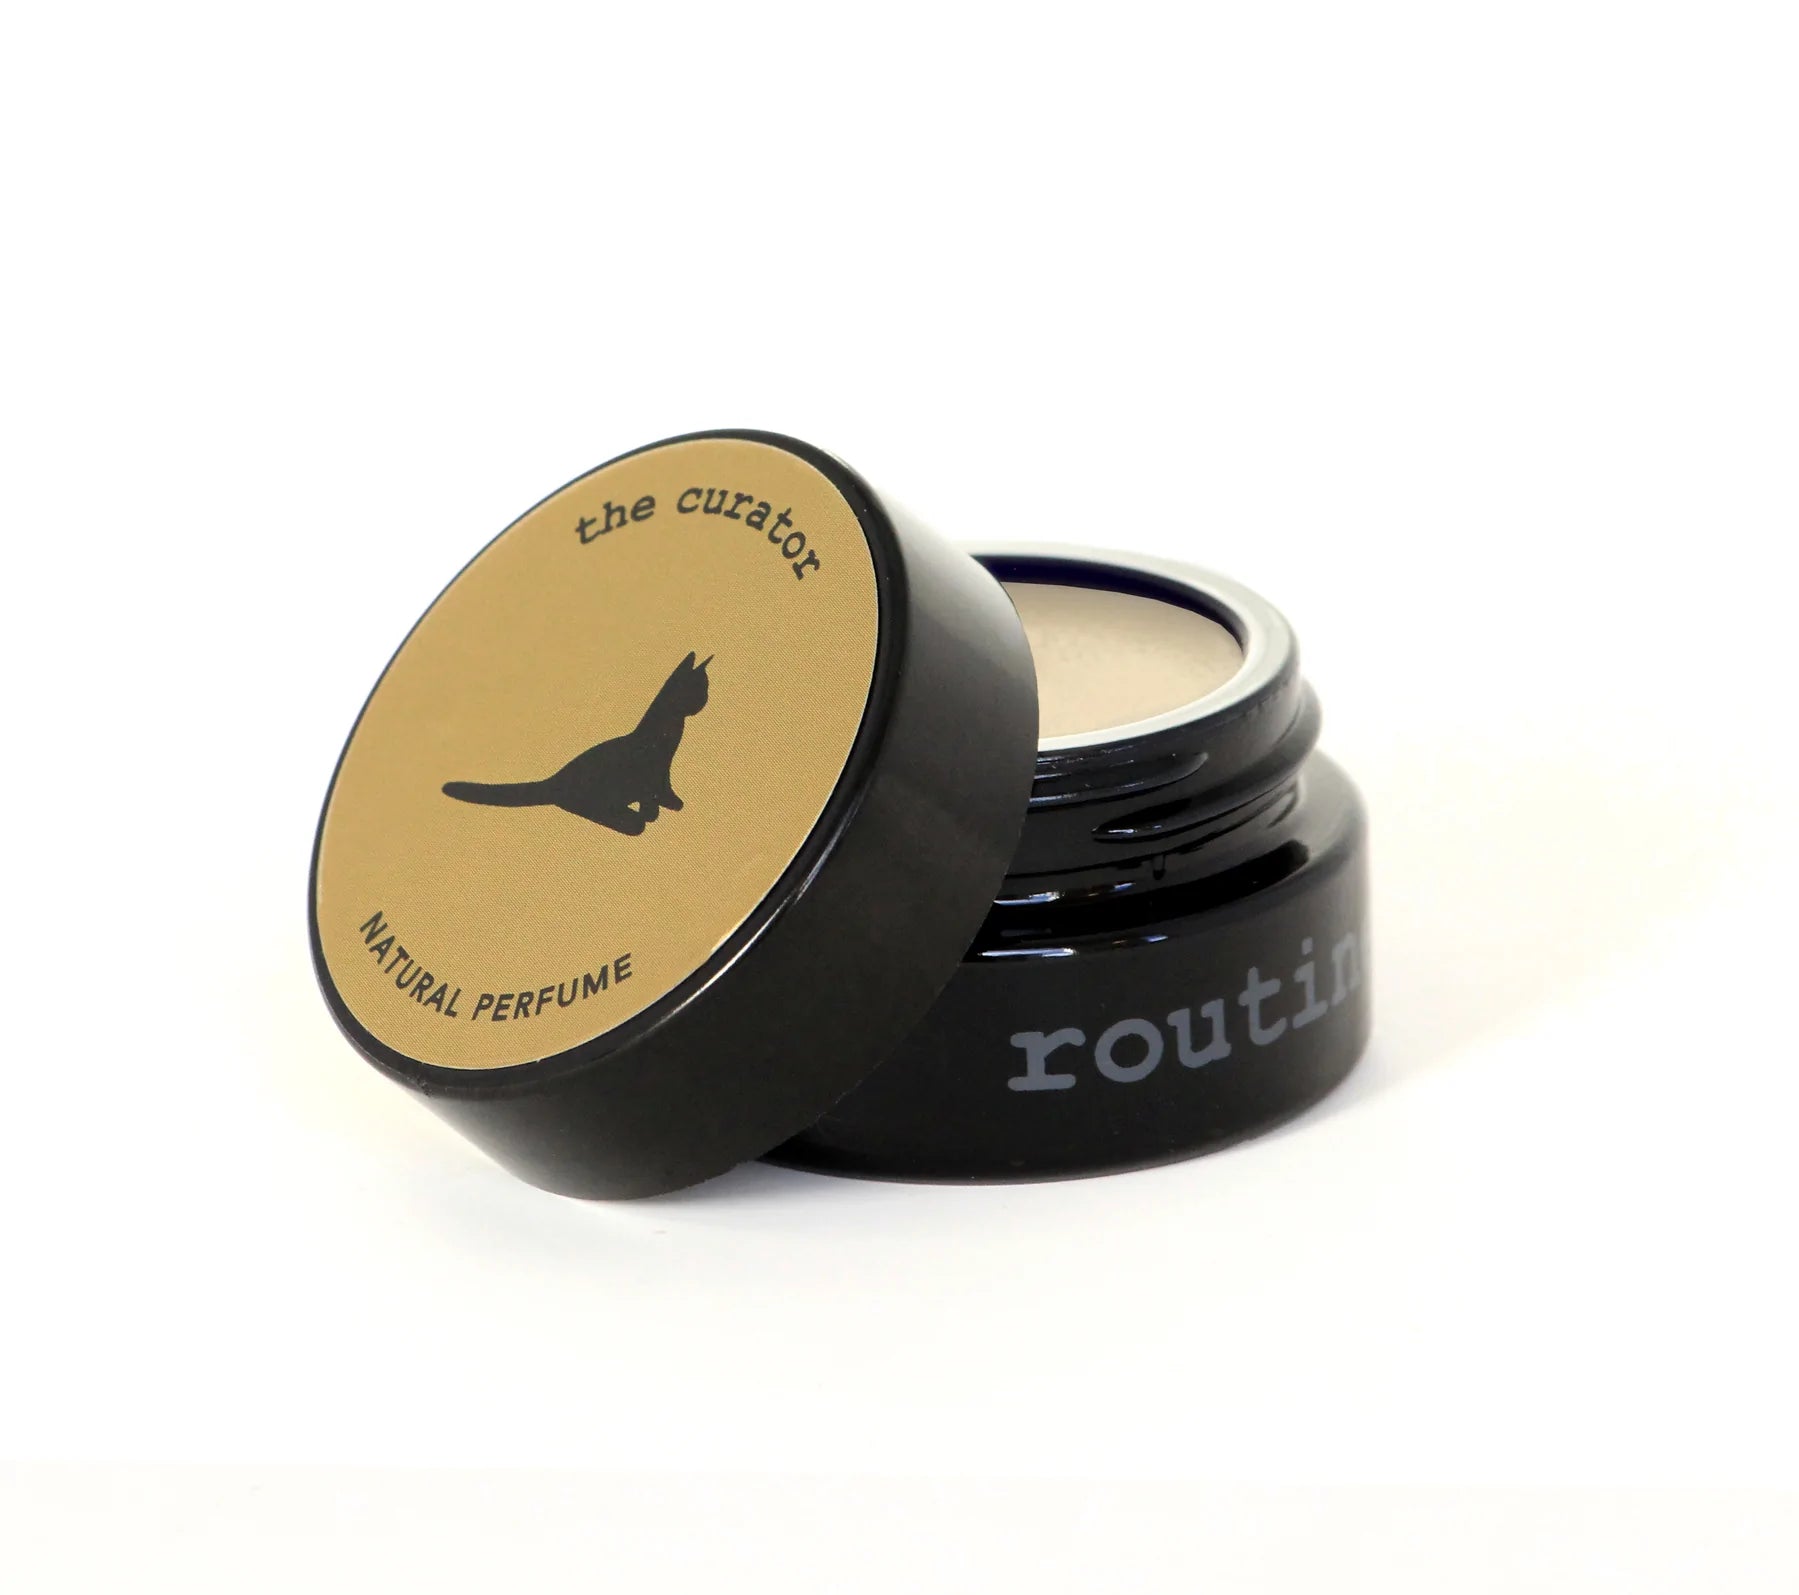 Routine - Natural Solid Perfume The Curator